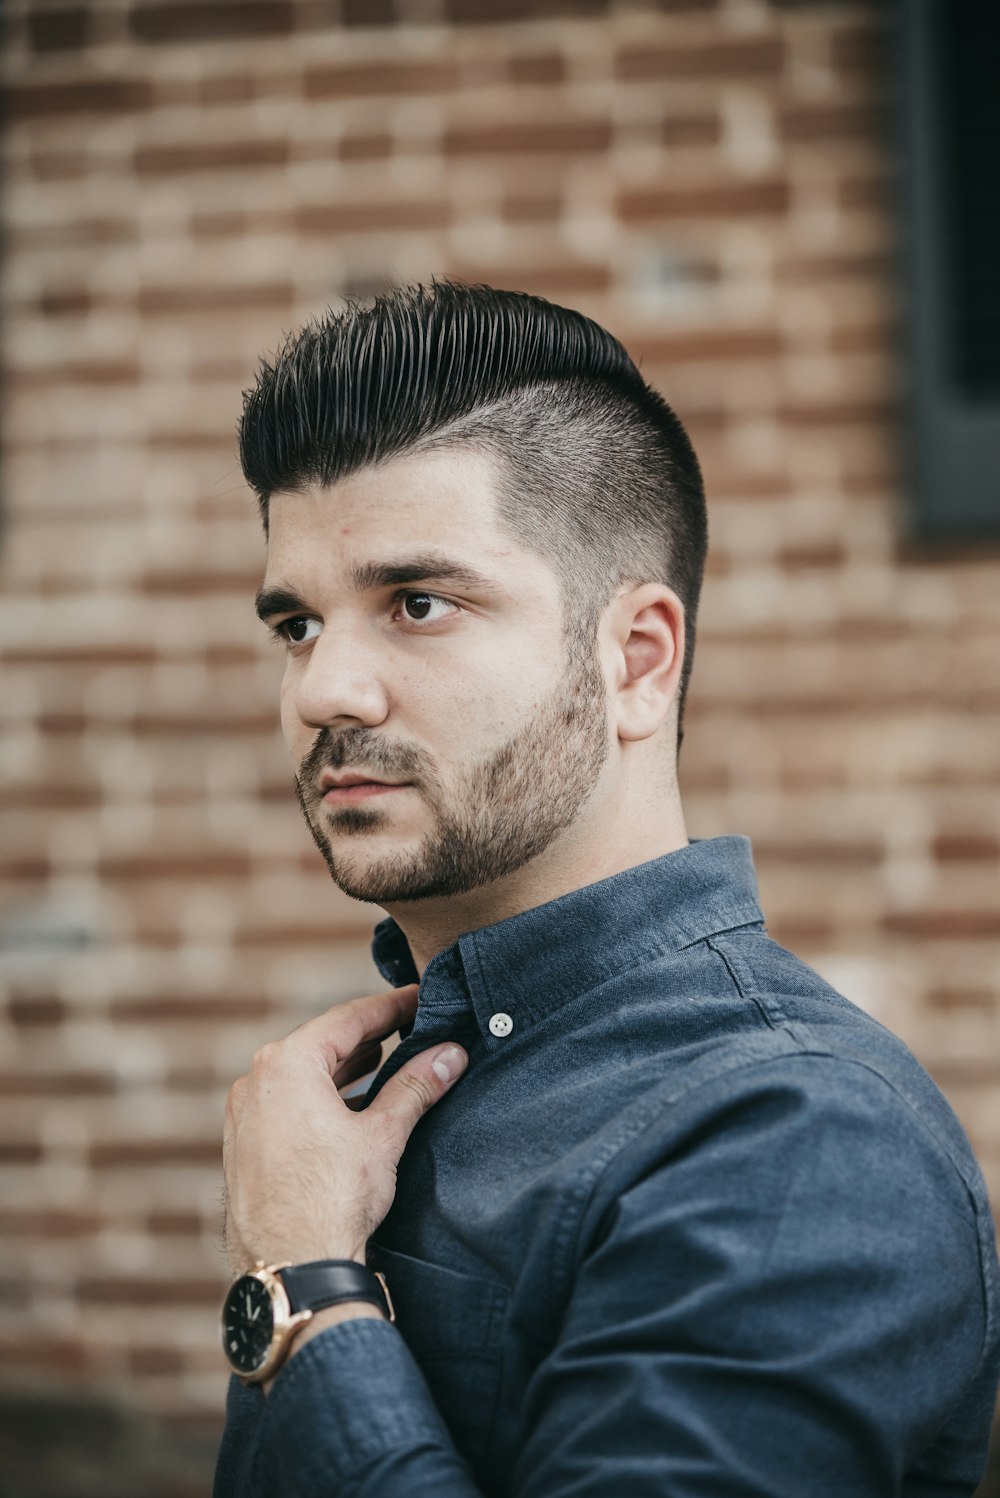 500 Haircut Pictures Download Free Images On Unsplash